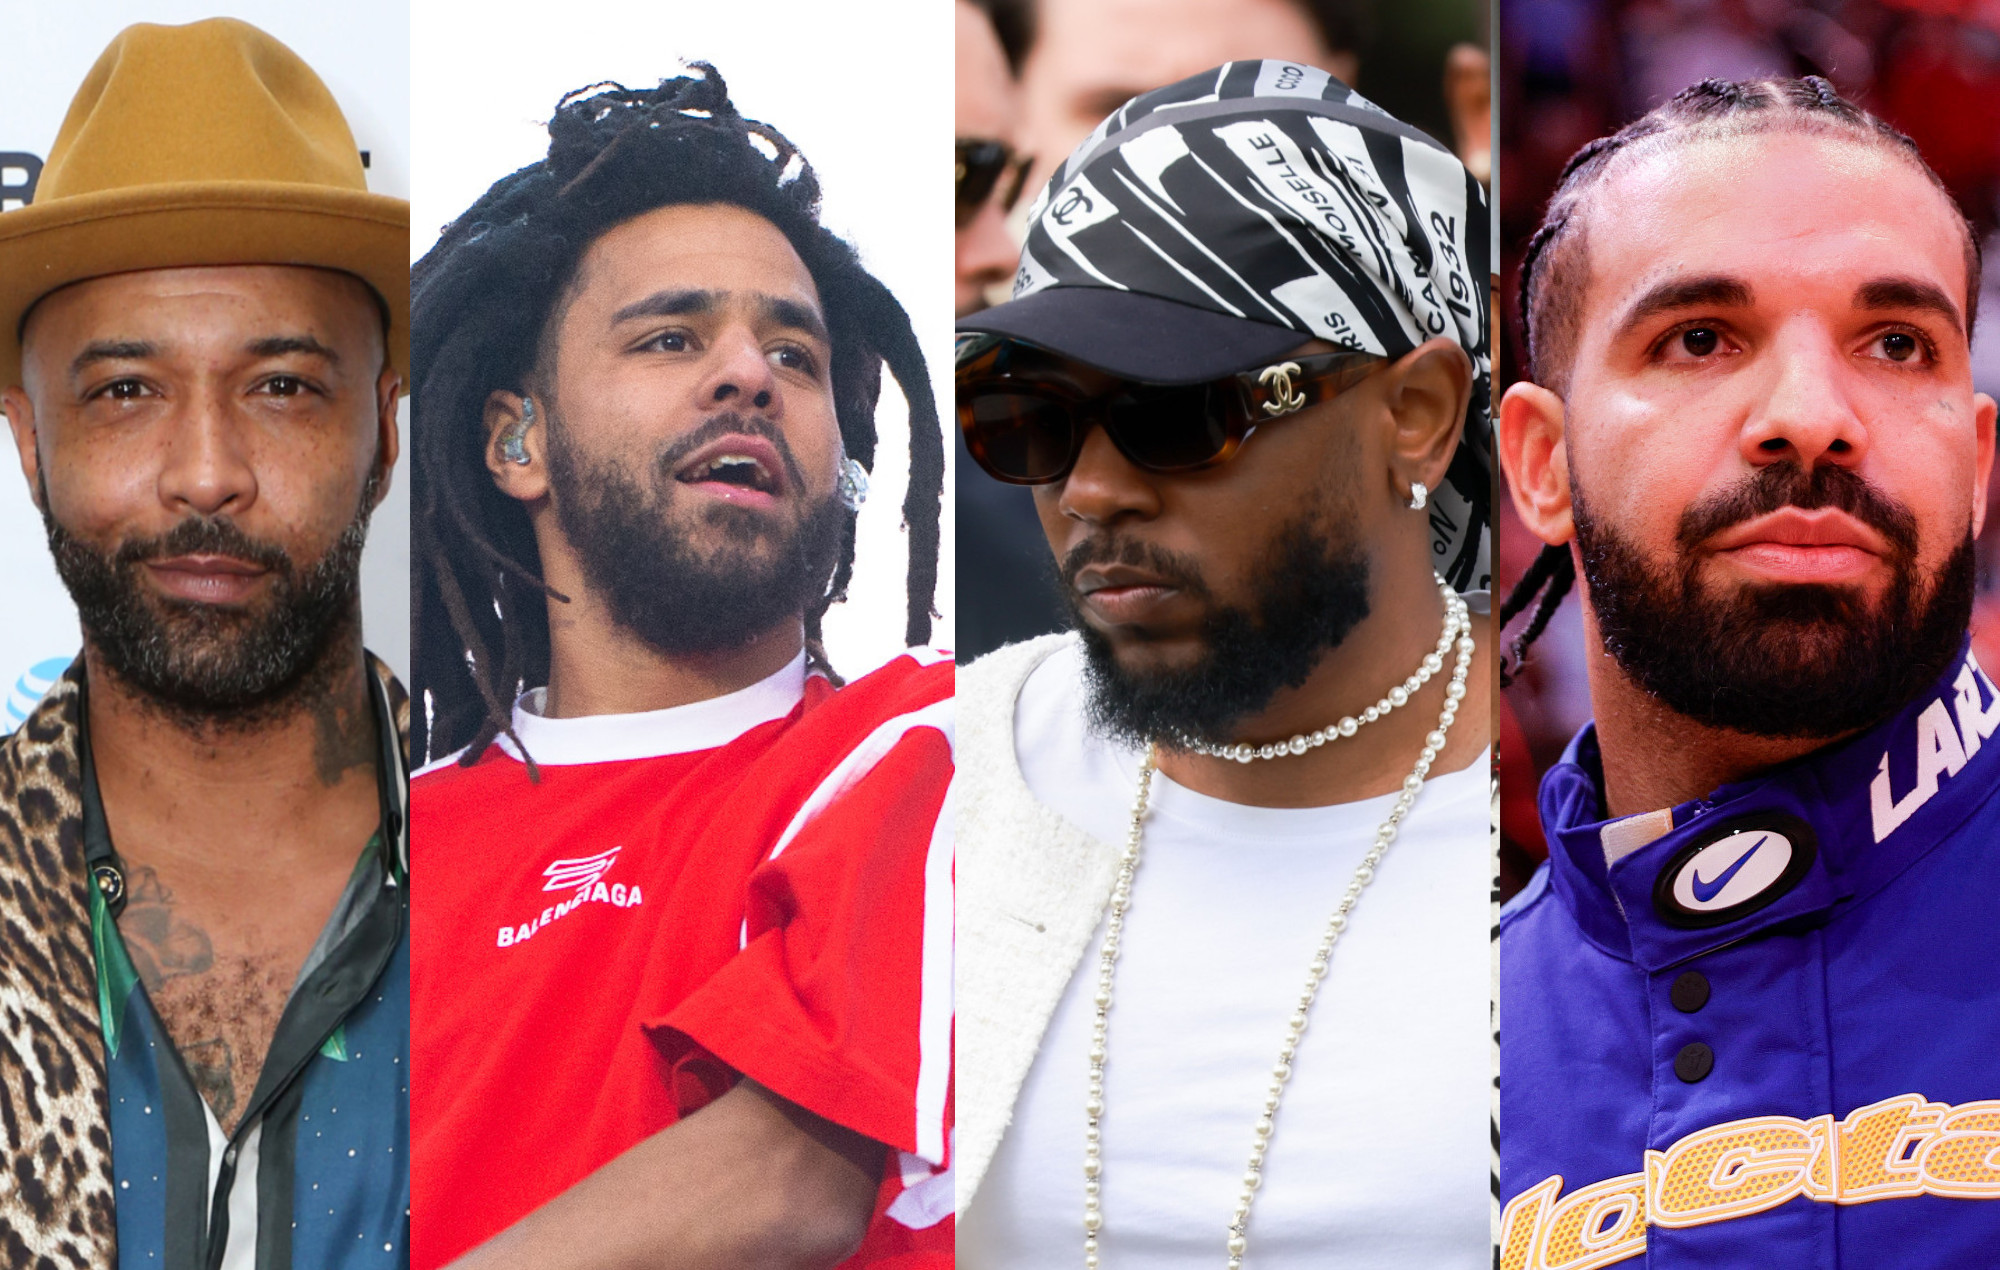 Joe Budden says Drake and Kendrick Lamar are about to “go nuclear” with diss tracks